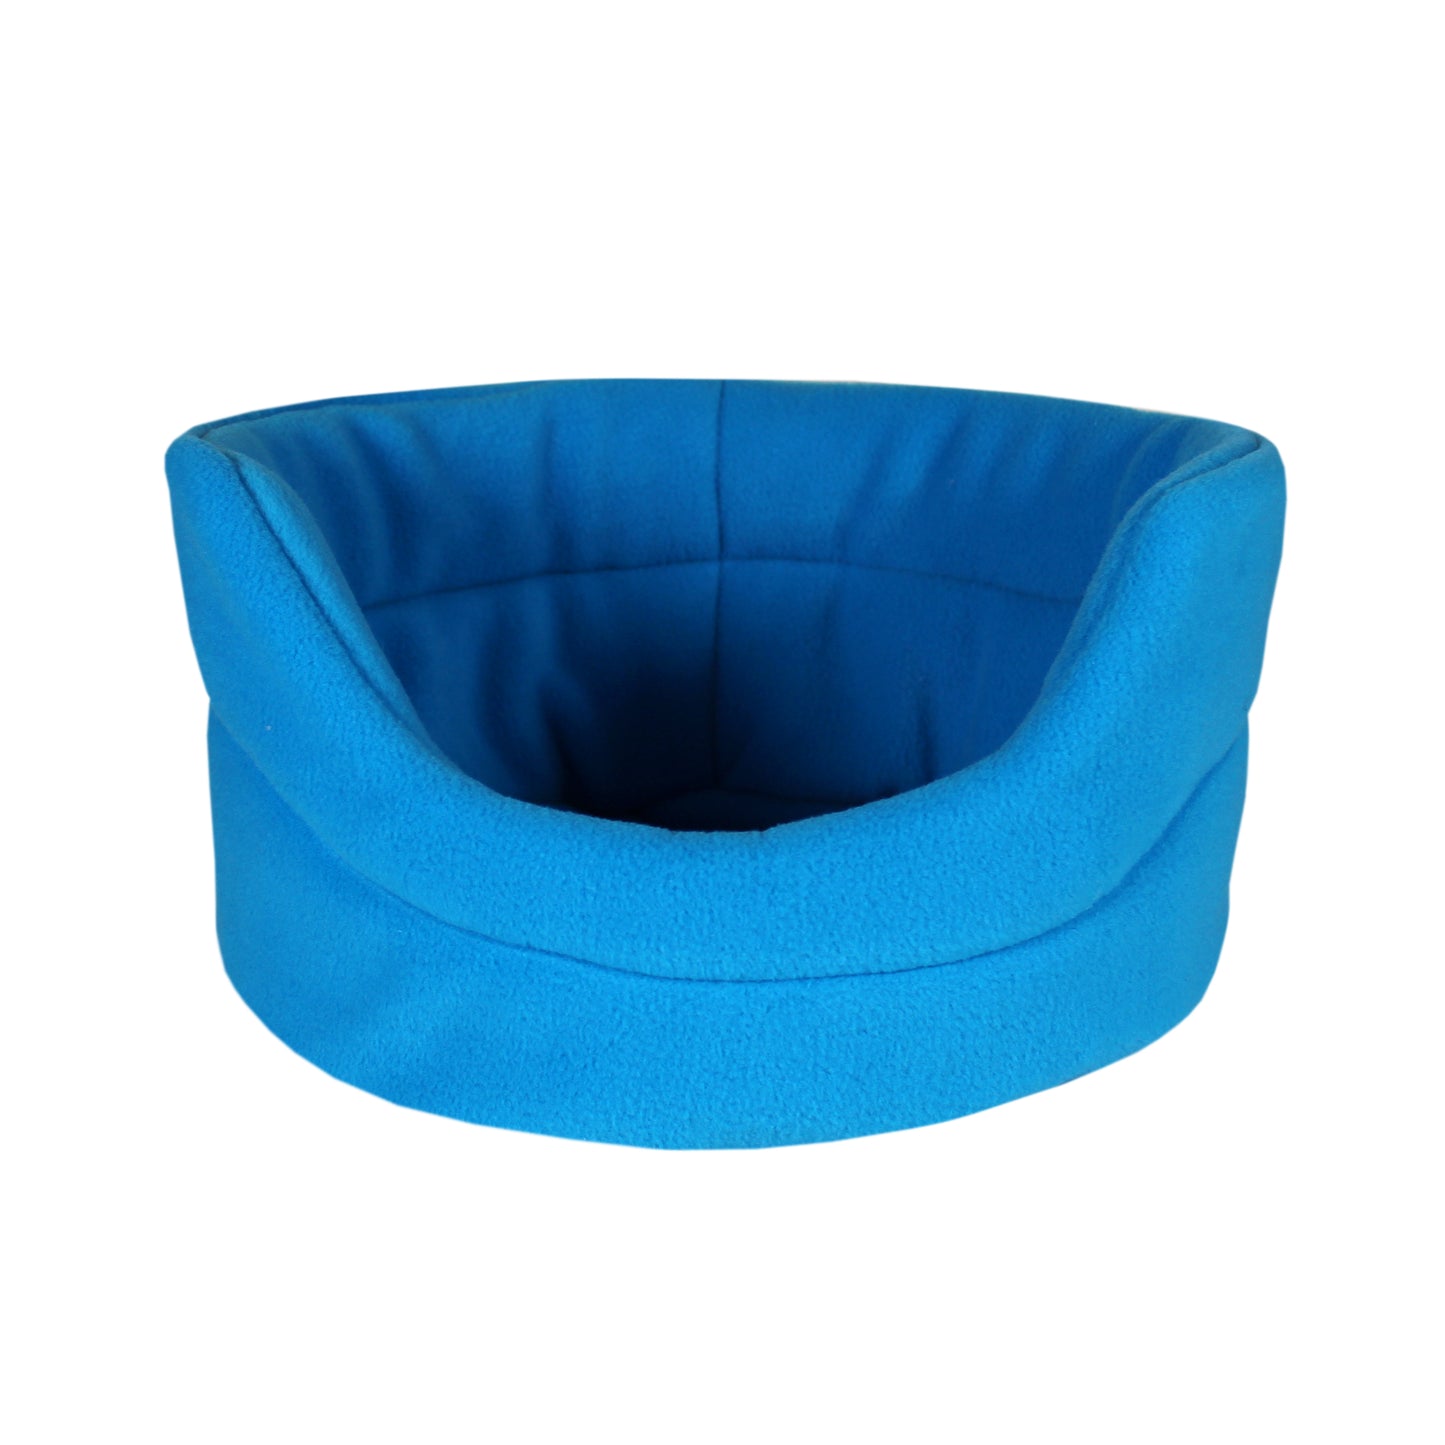 Rich Blue Guinea Pig Bed, front view of the bed for guinea pigs with out a guinea pig